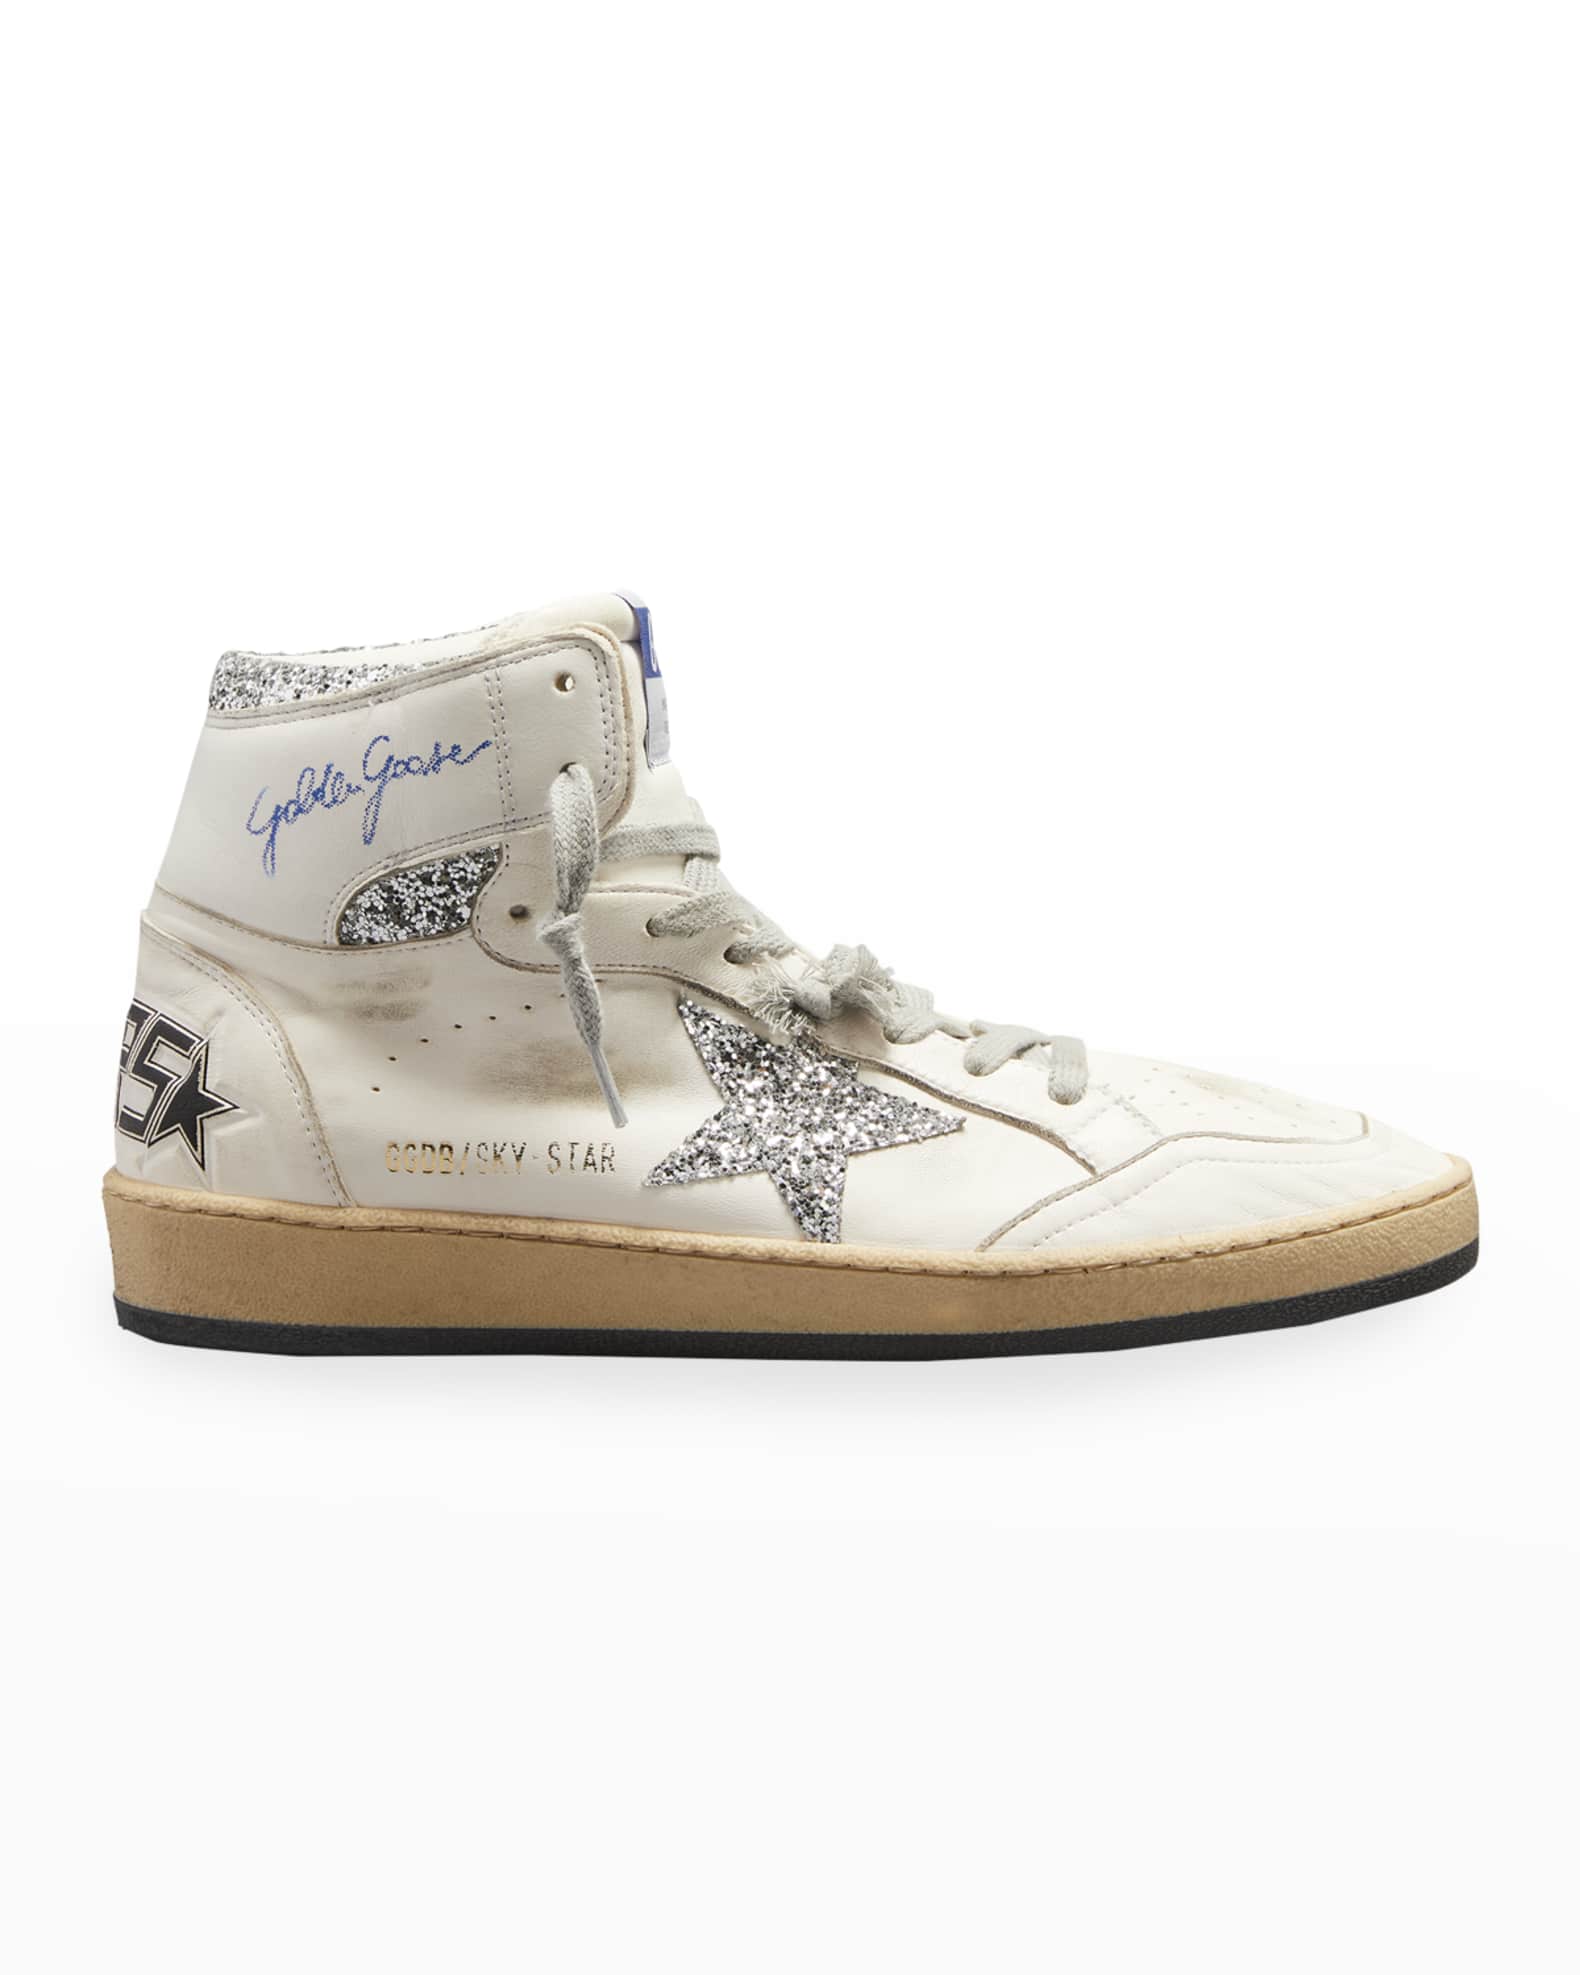 Golden Goose Sky Star Leather High-Top Sneakers | Marcus